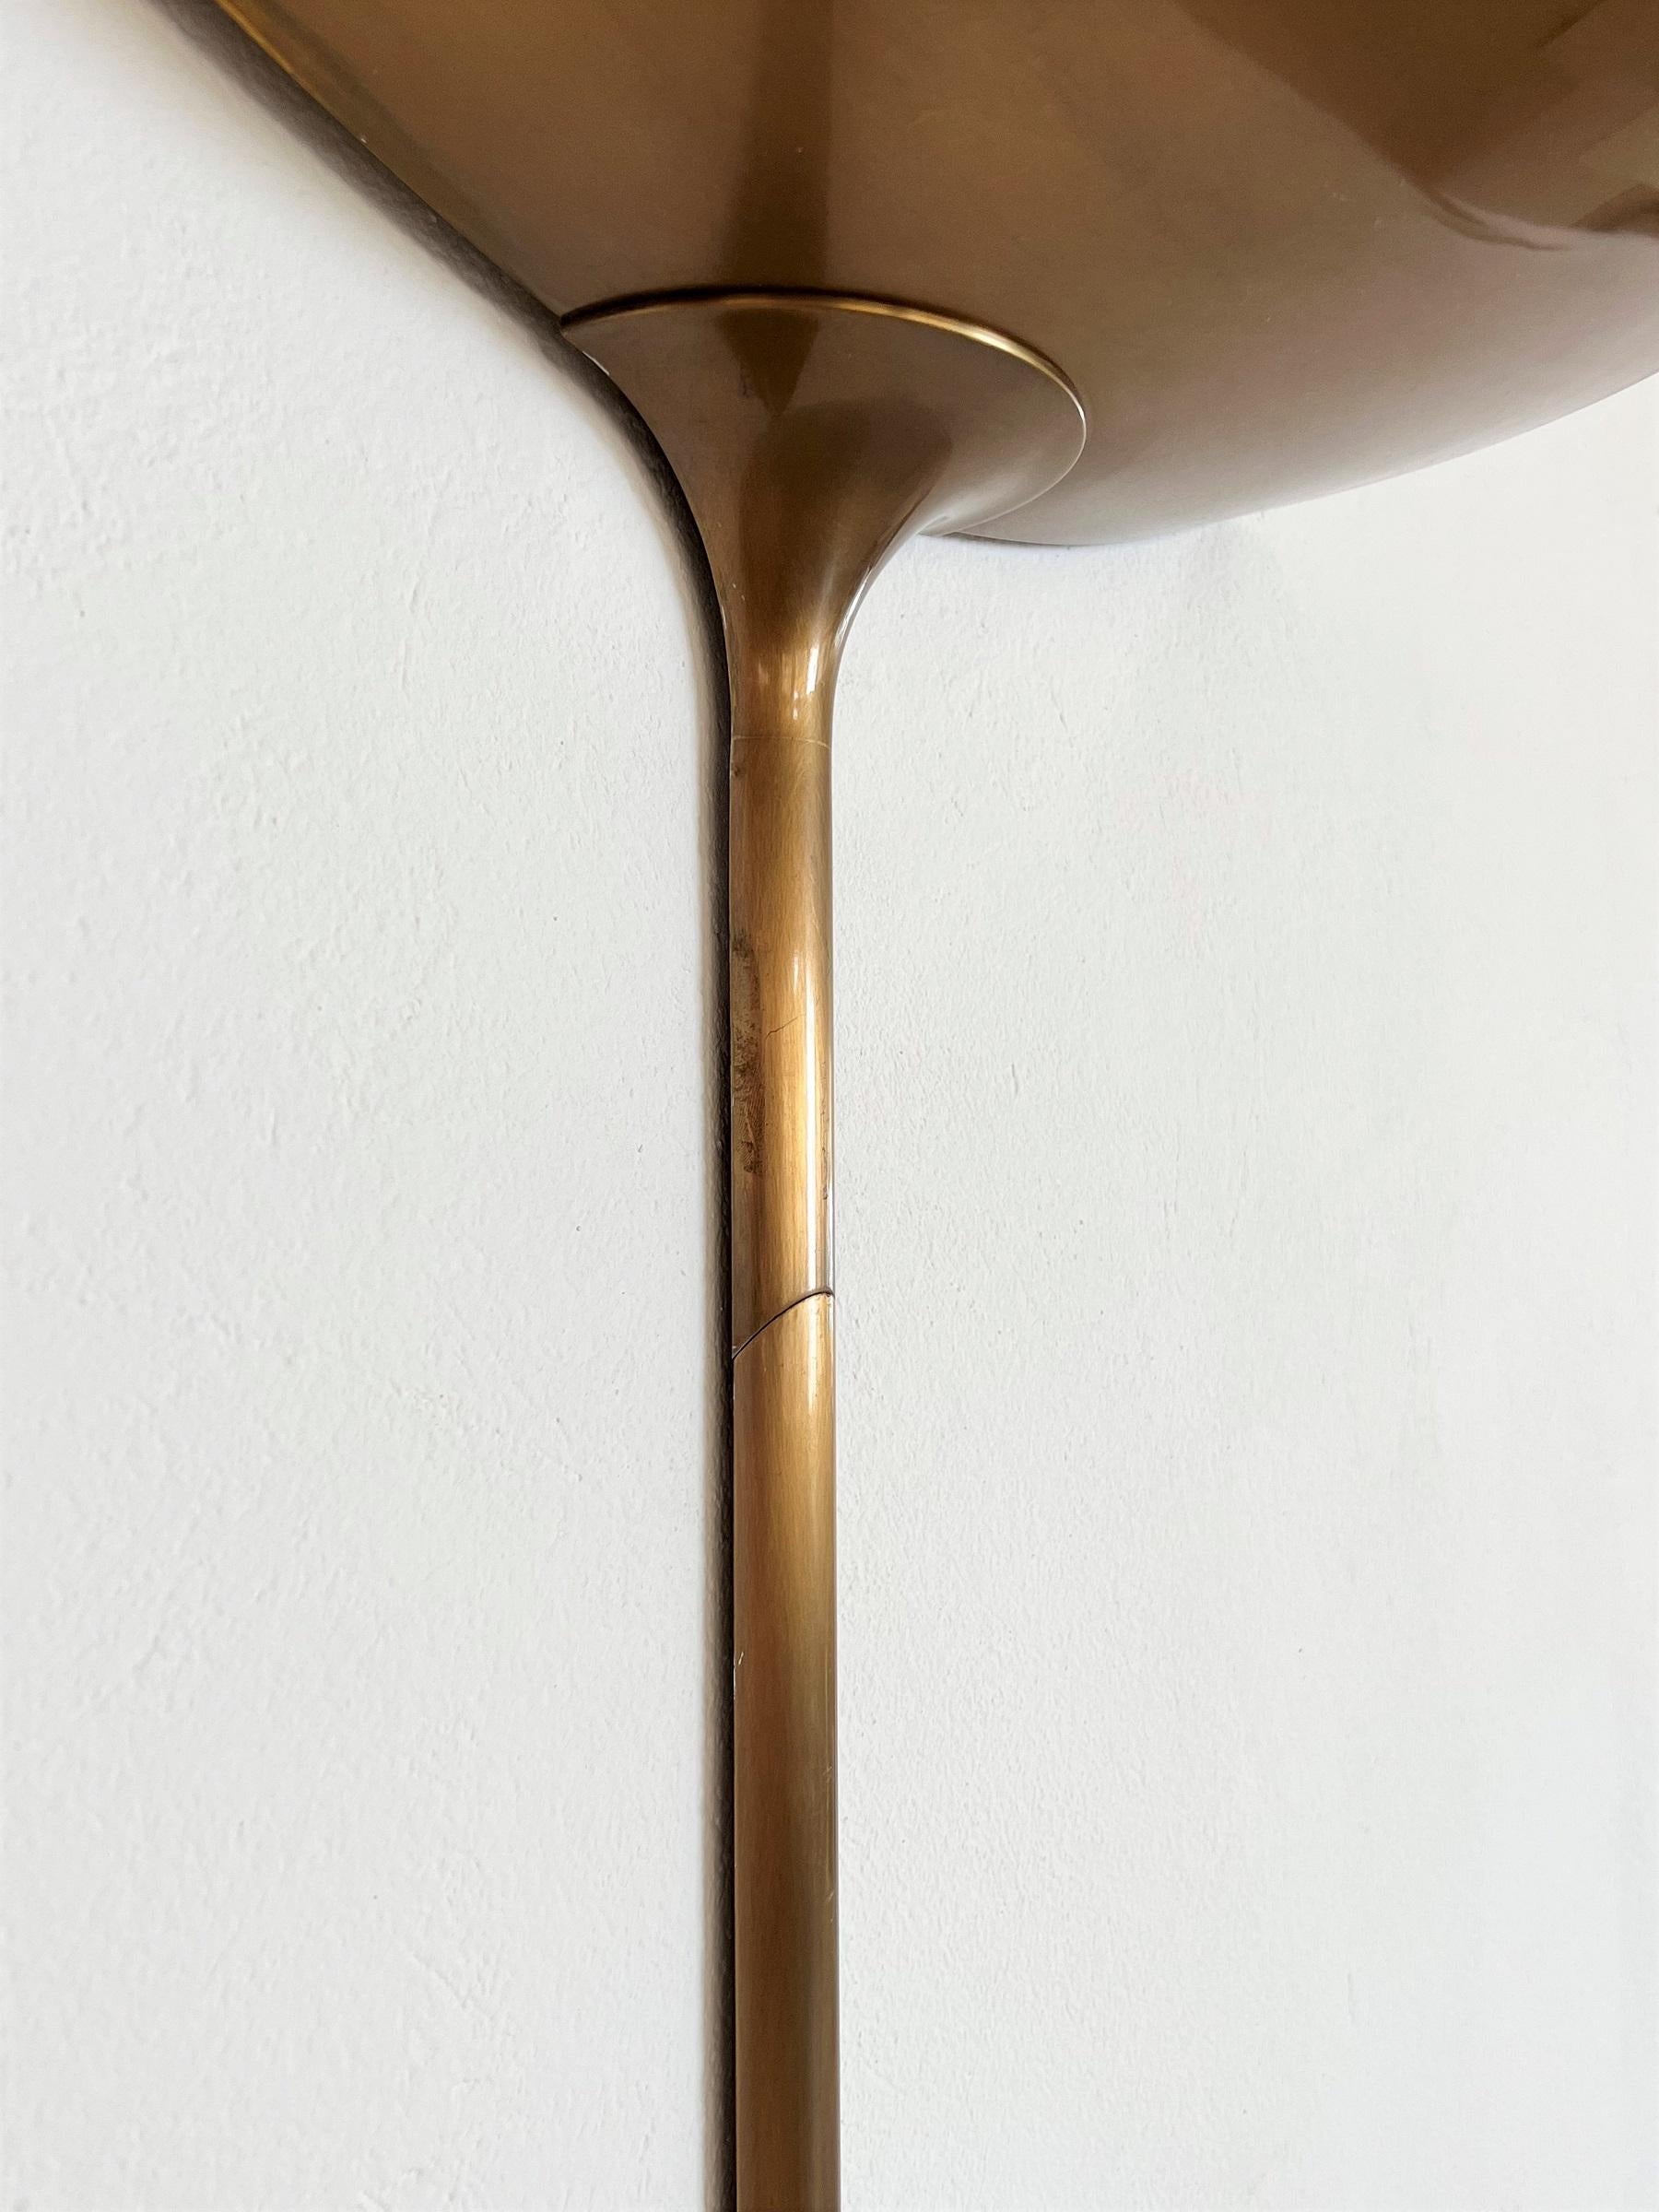 Florian Schulz Vintage Wall Sconce in Brushed Brass, 1970s For Sale 2